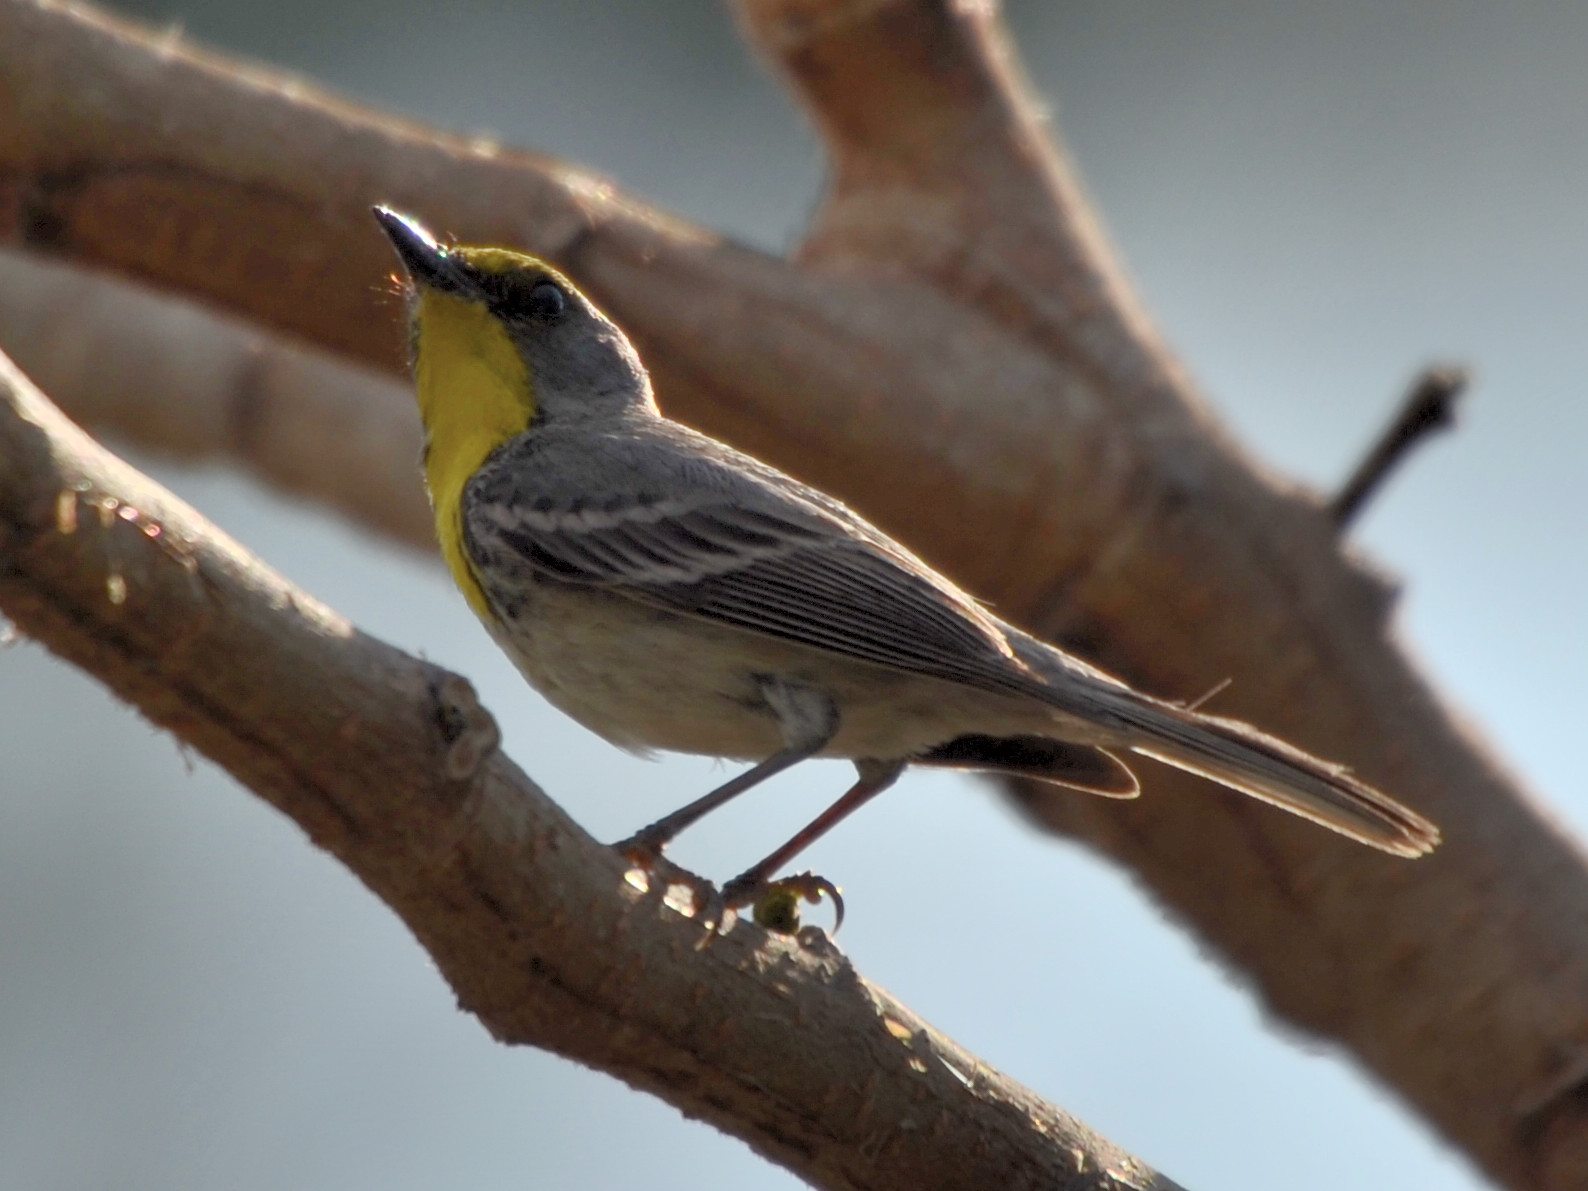 Click picture to see more  Olive-capped Warblers.